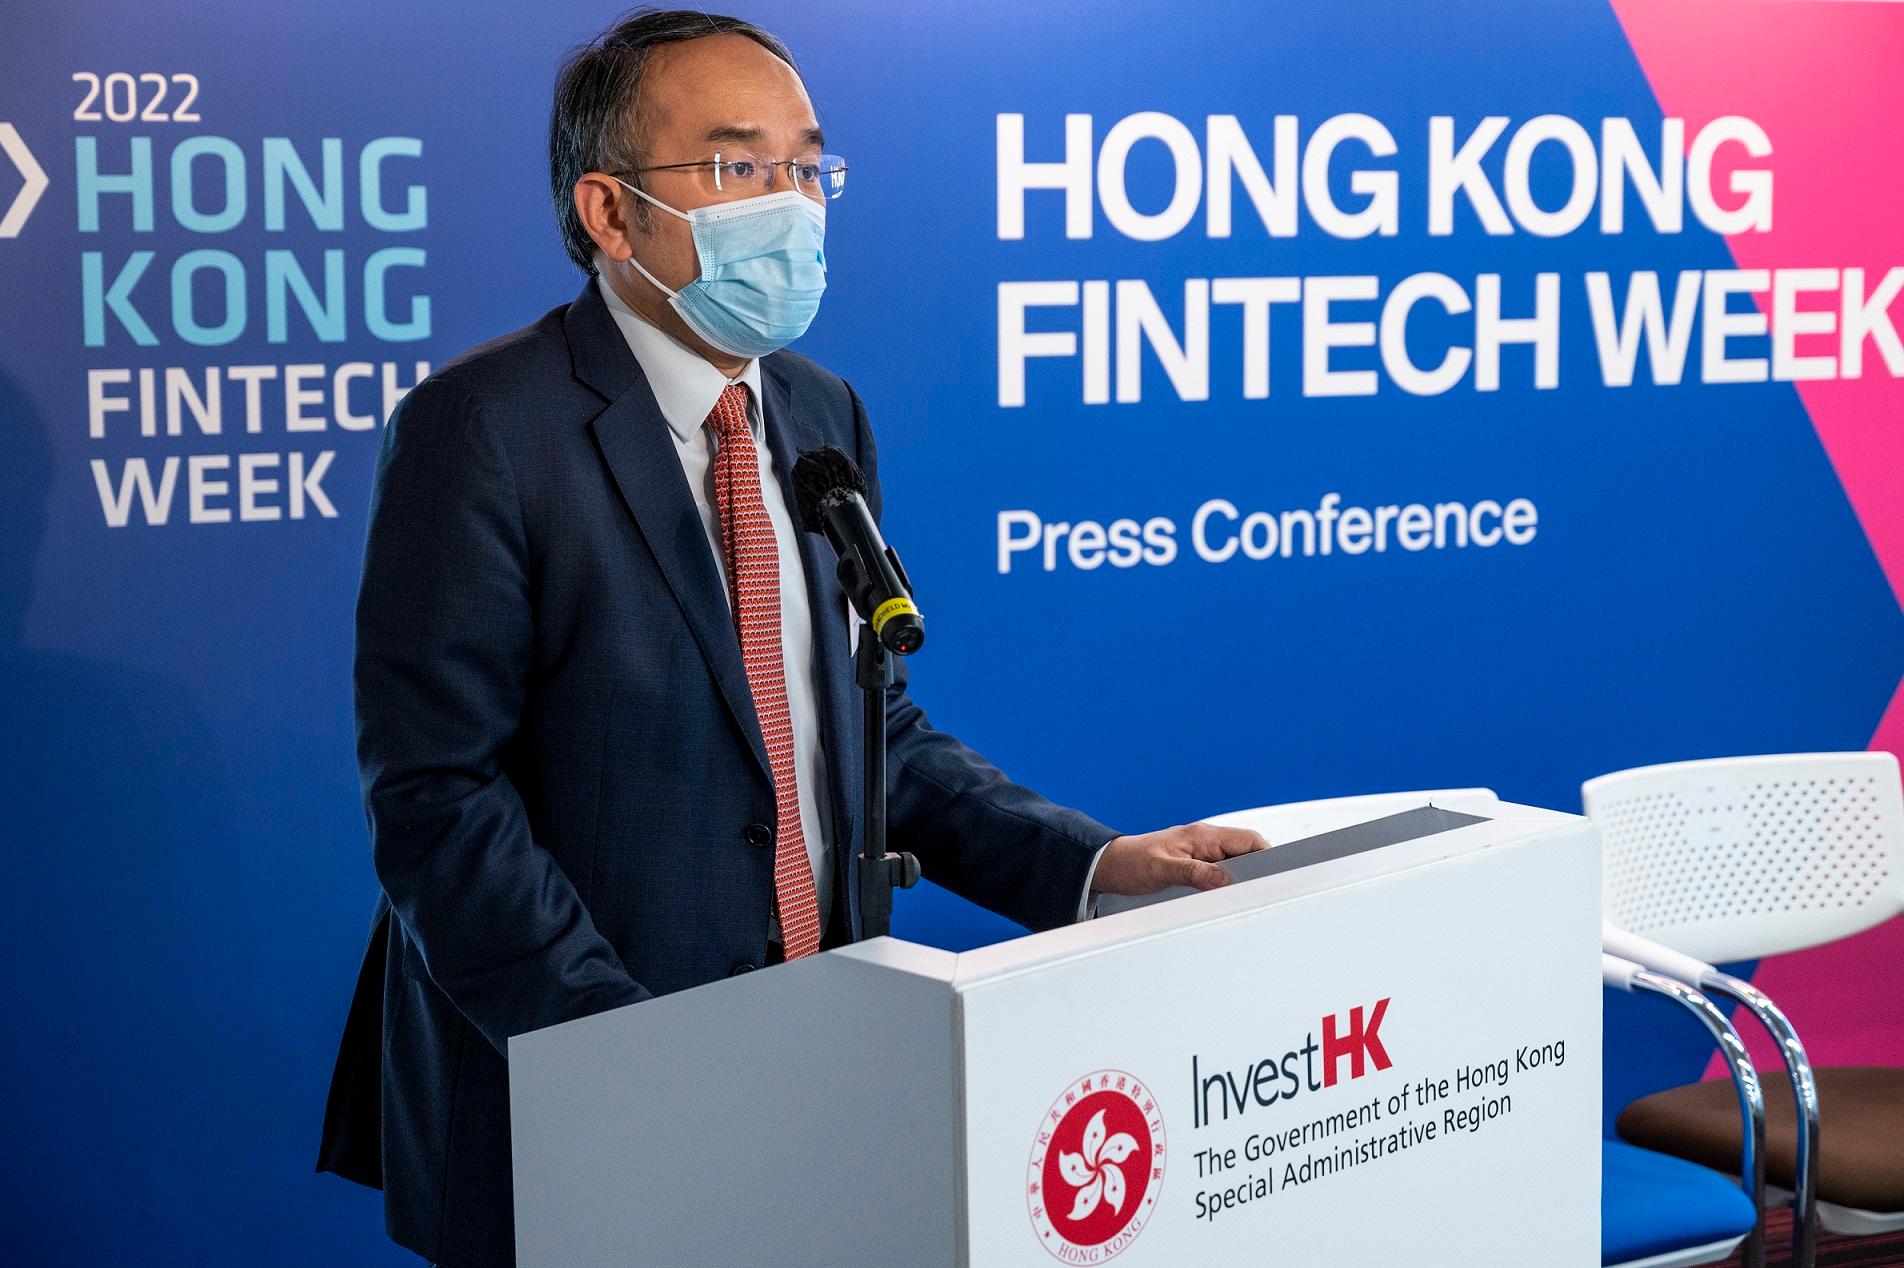 The Secretary for Financial Services and the Treasury, Mr Christopher Hui, today (October 13) announced the details of the Hong Kong FinTech Week 2022 initiatives on non-fungible tokens and shared a teaser related to the Government's announcement regarding the policy statement on the development of virtual assets in Hong Kong.